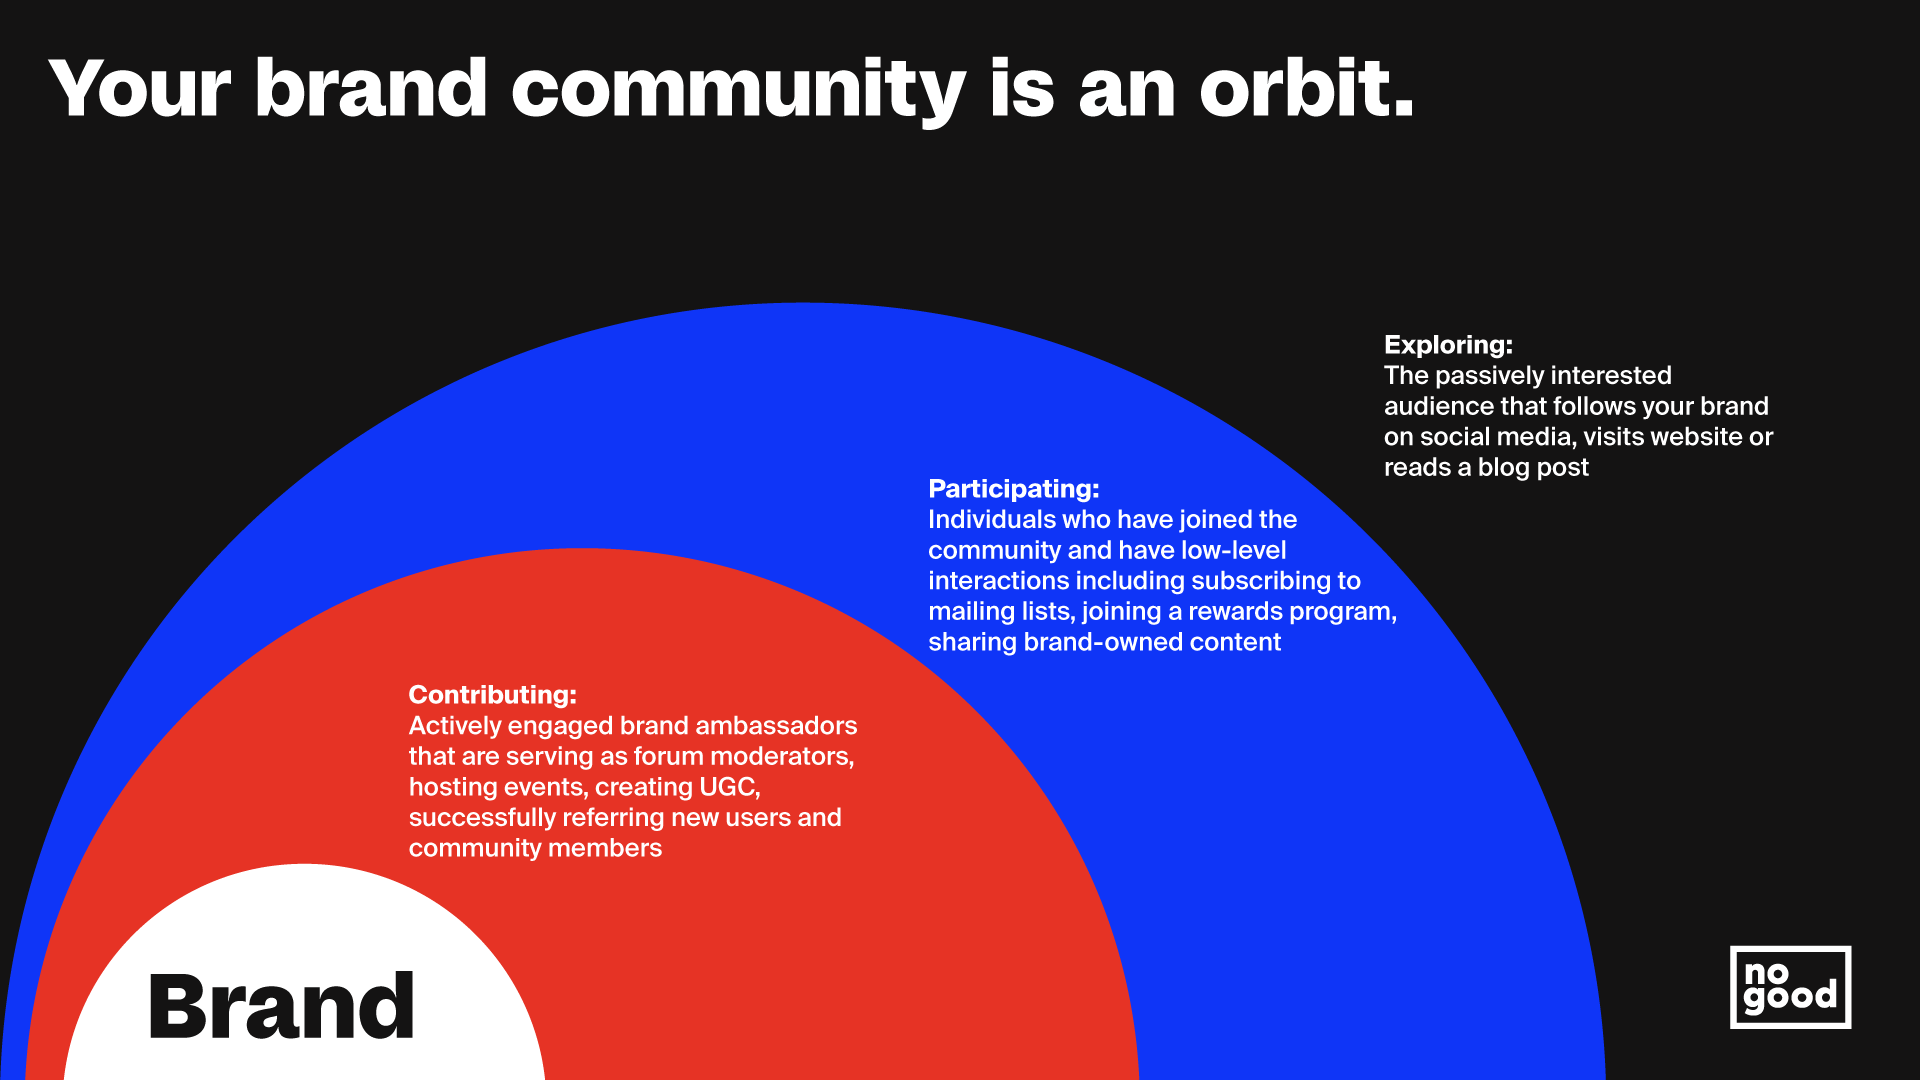 Your brand community is an orbit in community-led growth.